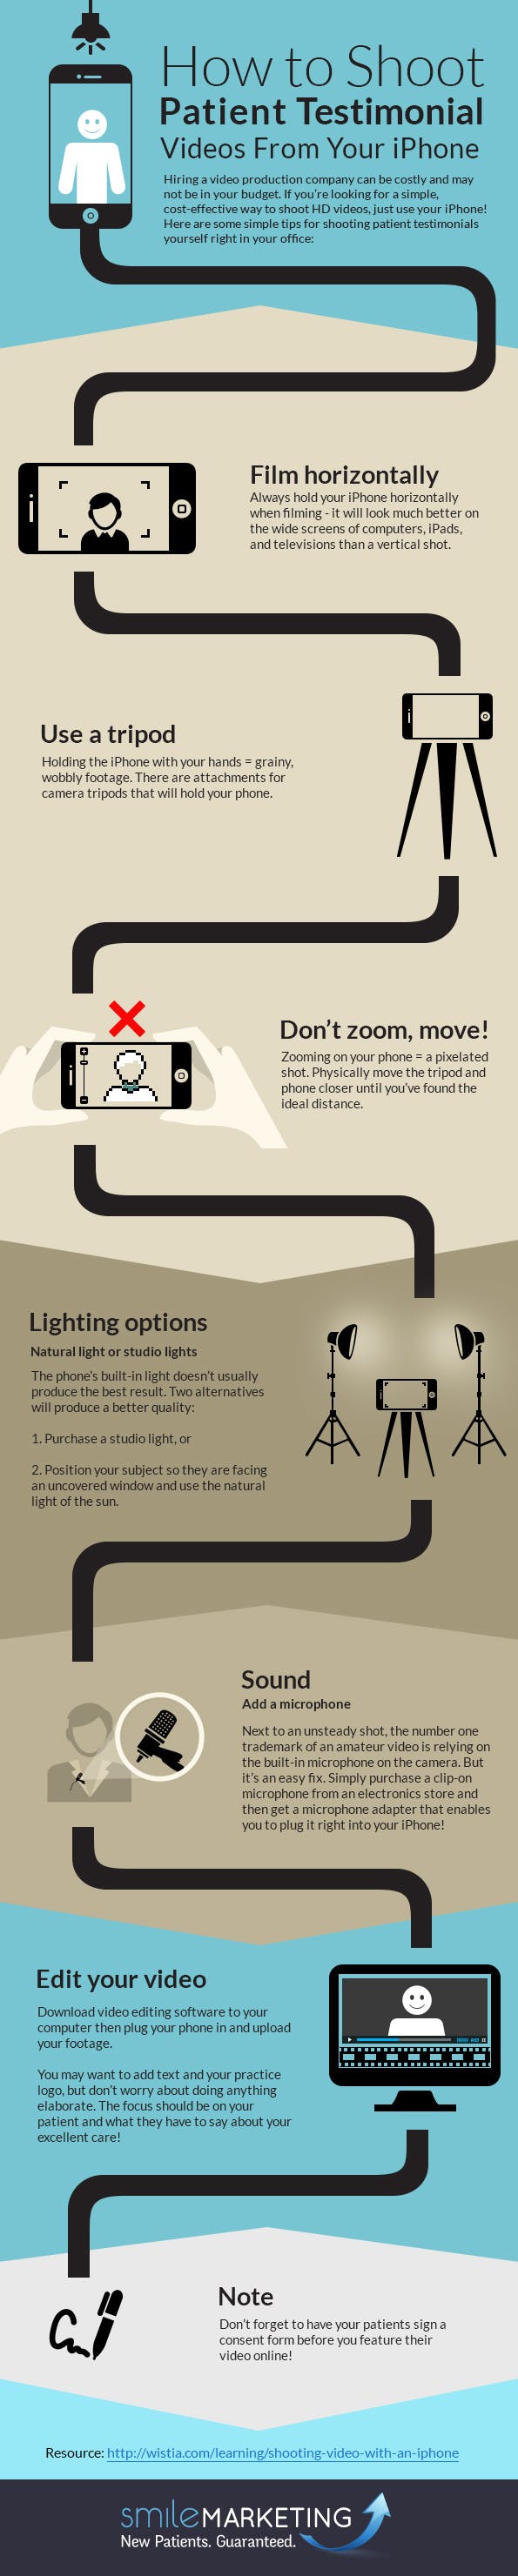 How To Shoot Video From Your Iphone Infographic Sm